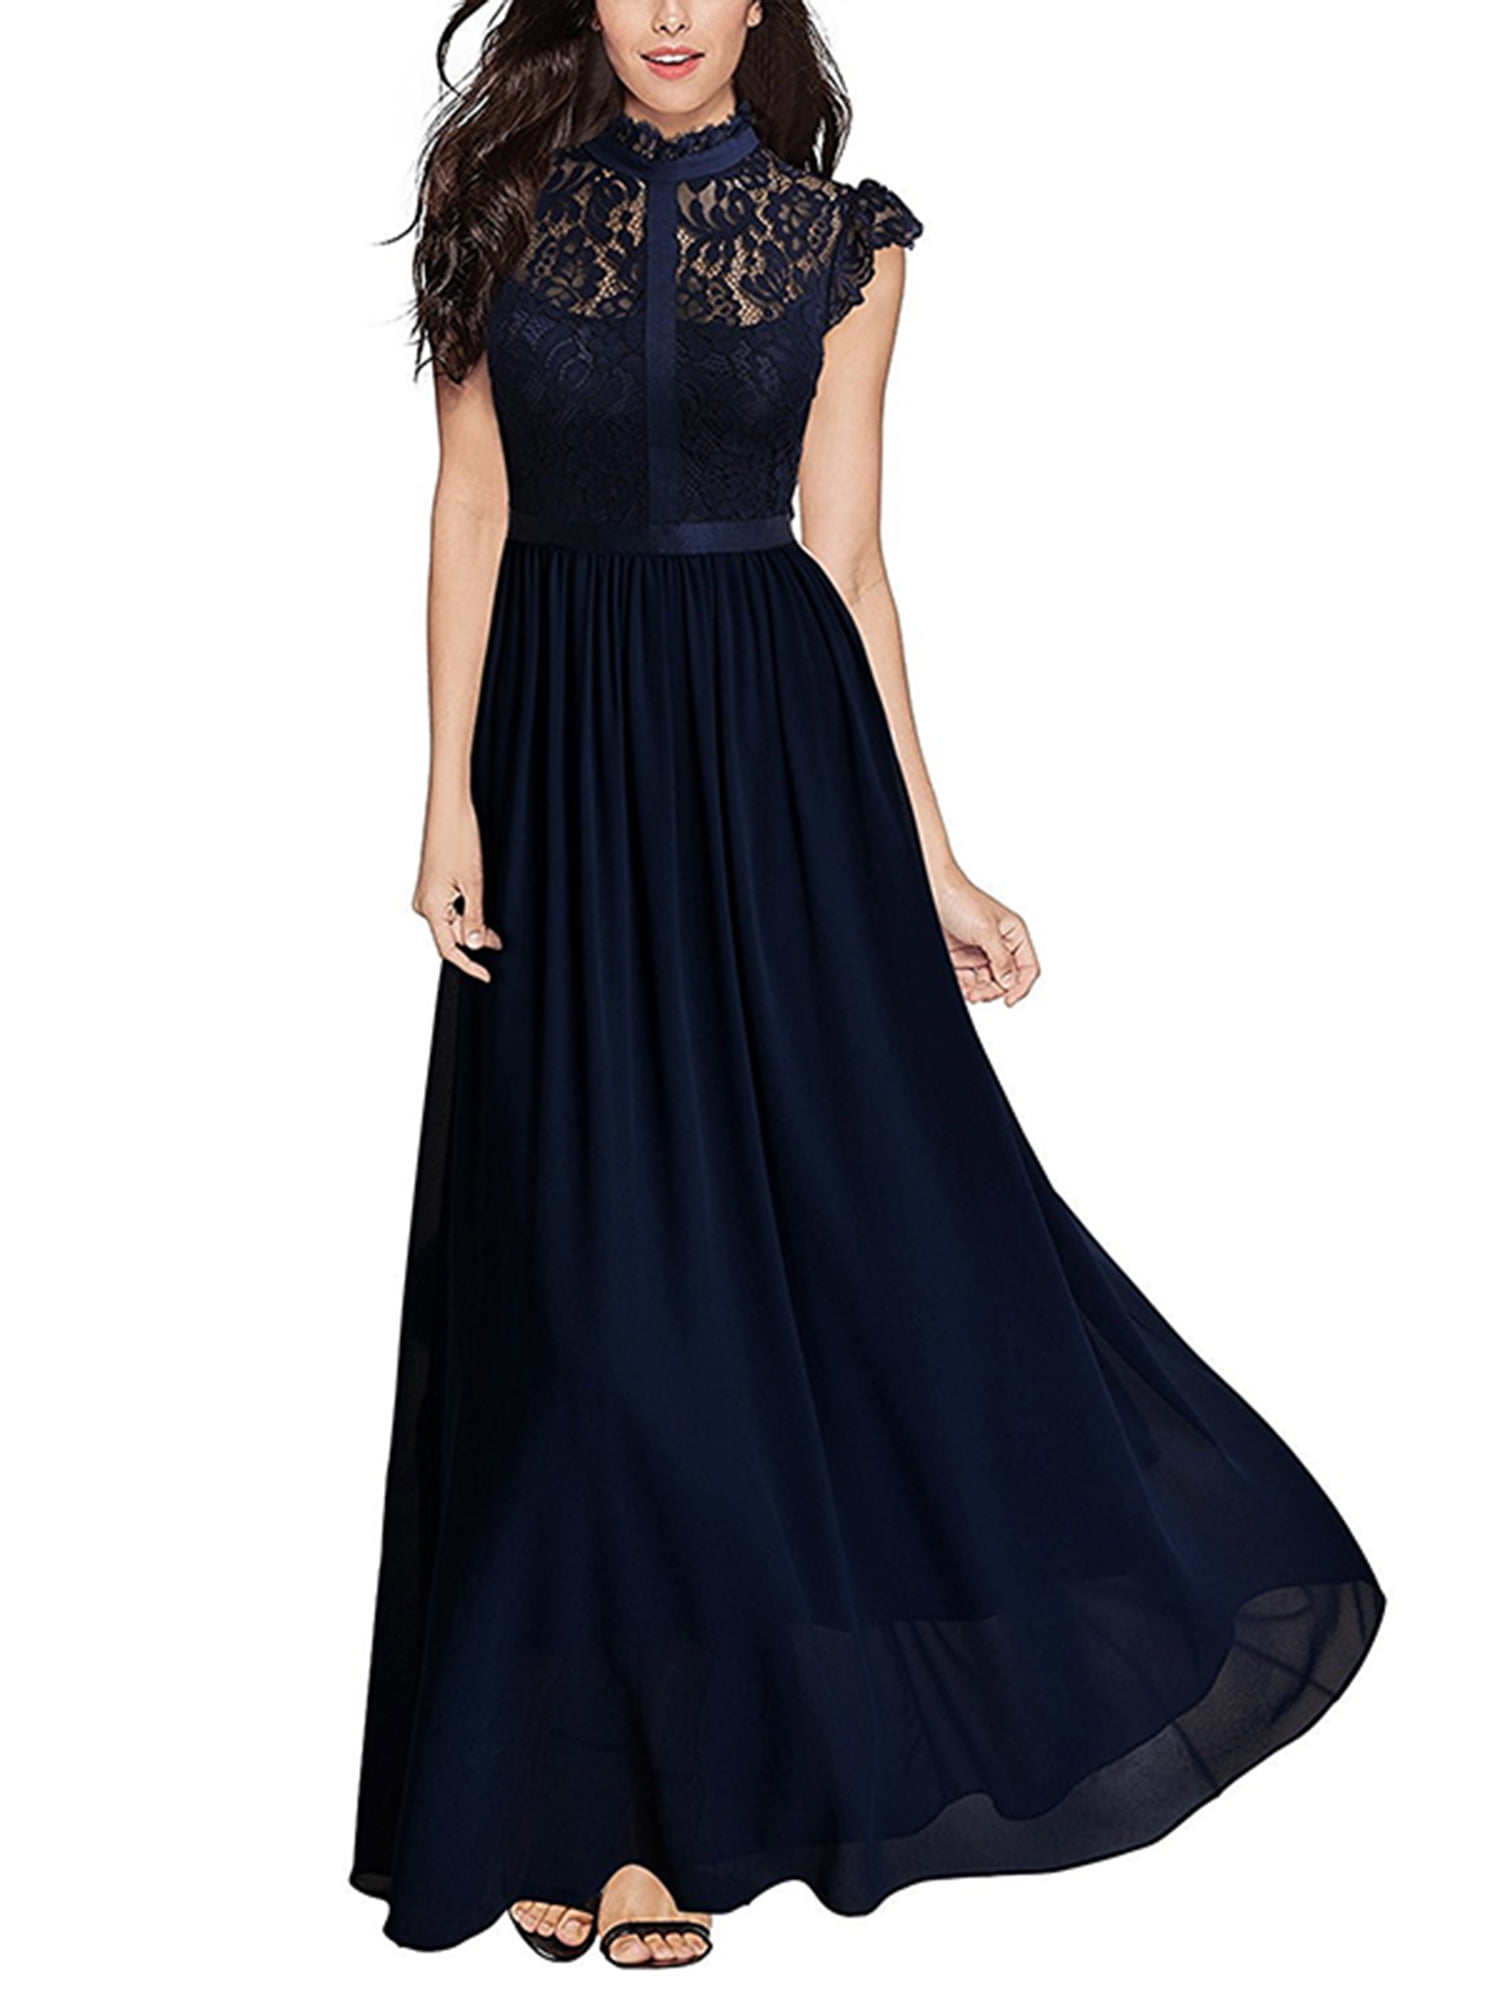 Long Chiffon Lace Evening Formal Party Ball Gown Prom Women’s Bridesmaid Dress 